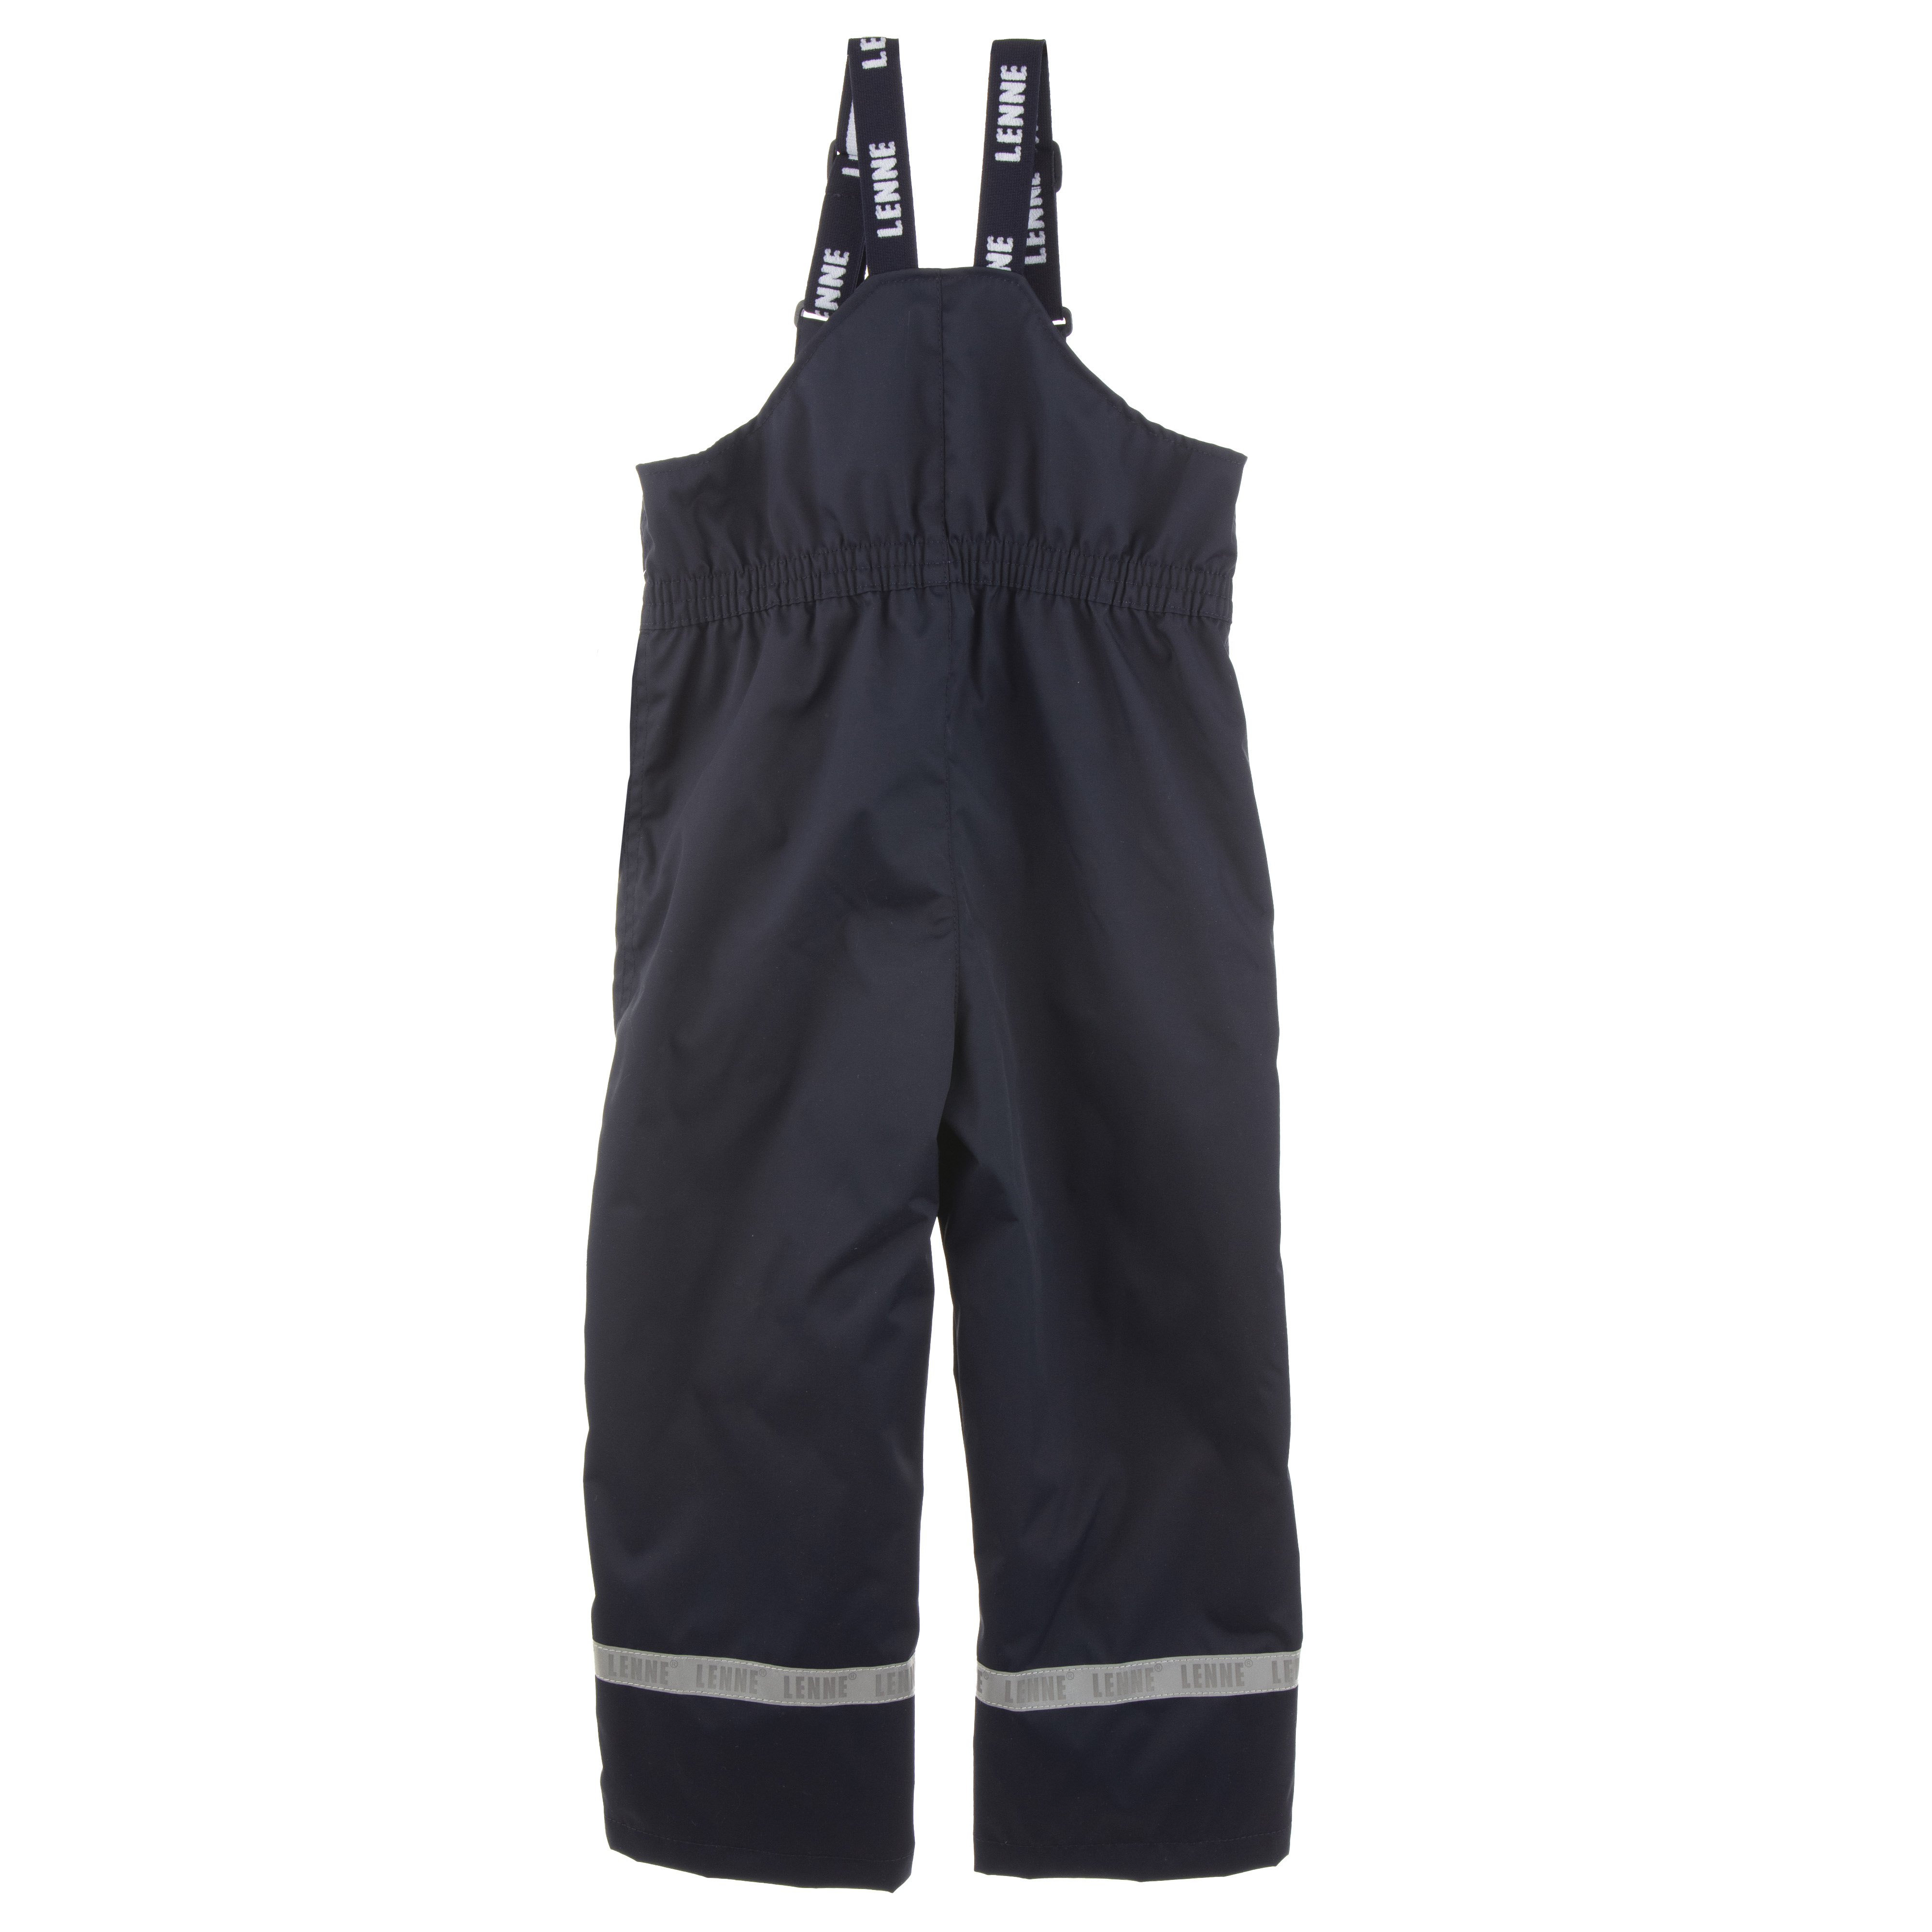 Outdoor pants for kids - Lenne